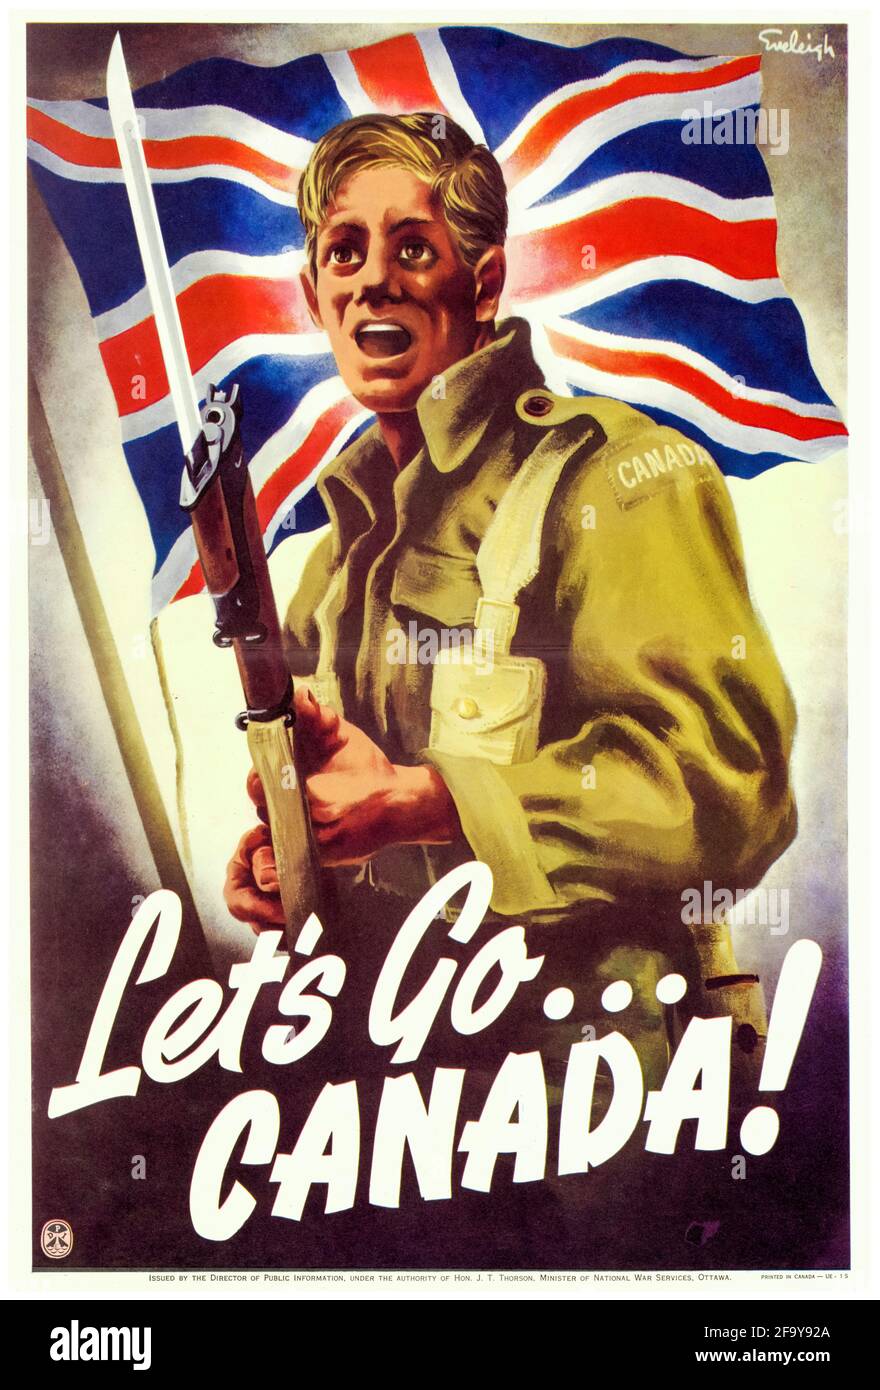 Canadian, WW2 motivational poster: Let's Go Canada! (Soldier and Union Jack flag), 1942-1945 Stock Photo